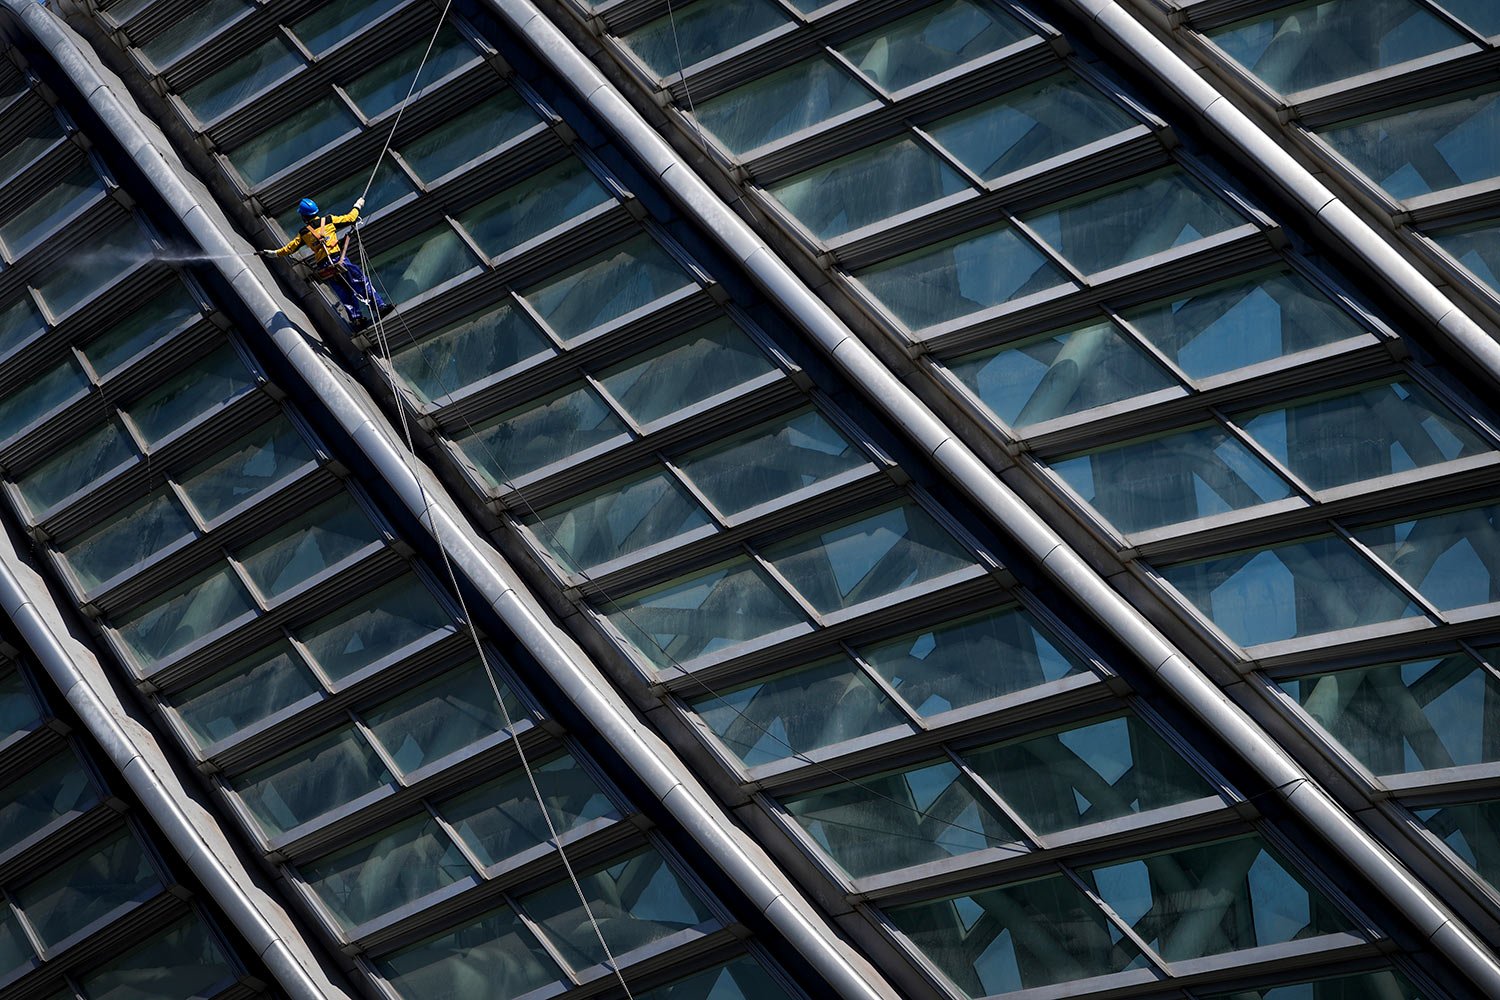  A window washer descends on a rope as he cleans the window panels of the Phoenix Center, Sunday, April 3, 2022, in Beijing. (AP Photo/Andy Wong) 